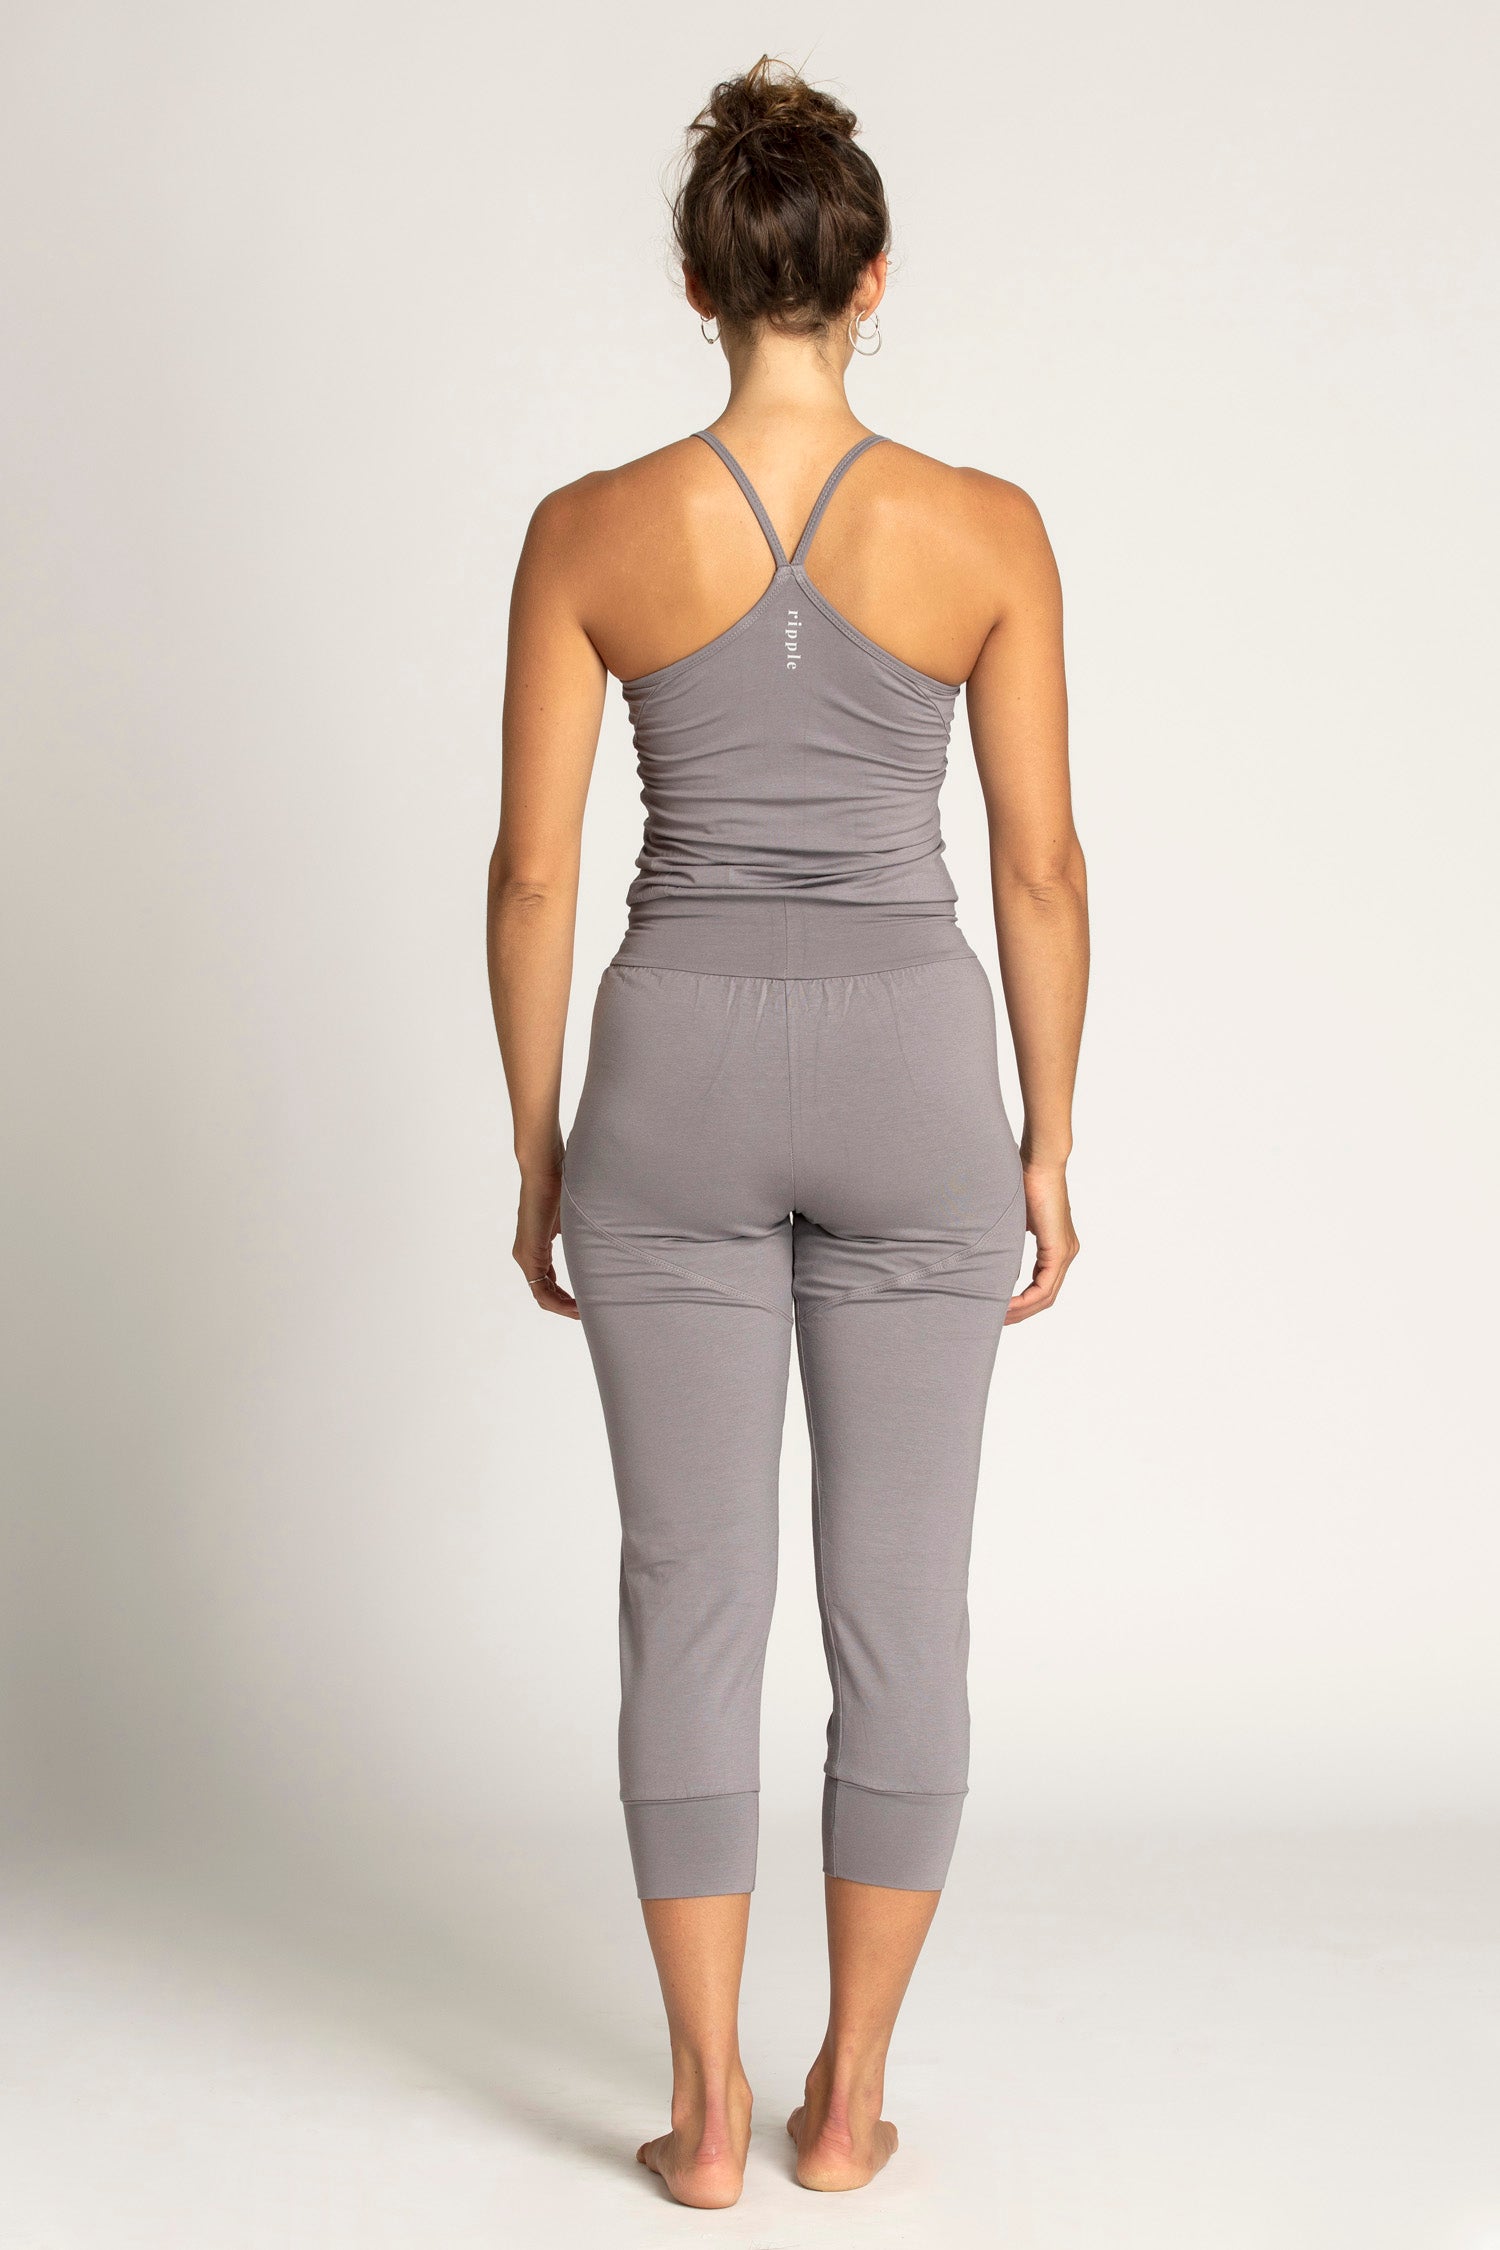 Cropped Yoga Jumpsuit - Blue Night - Women - Yoga Specials